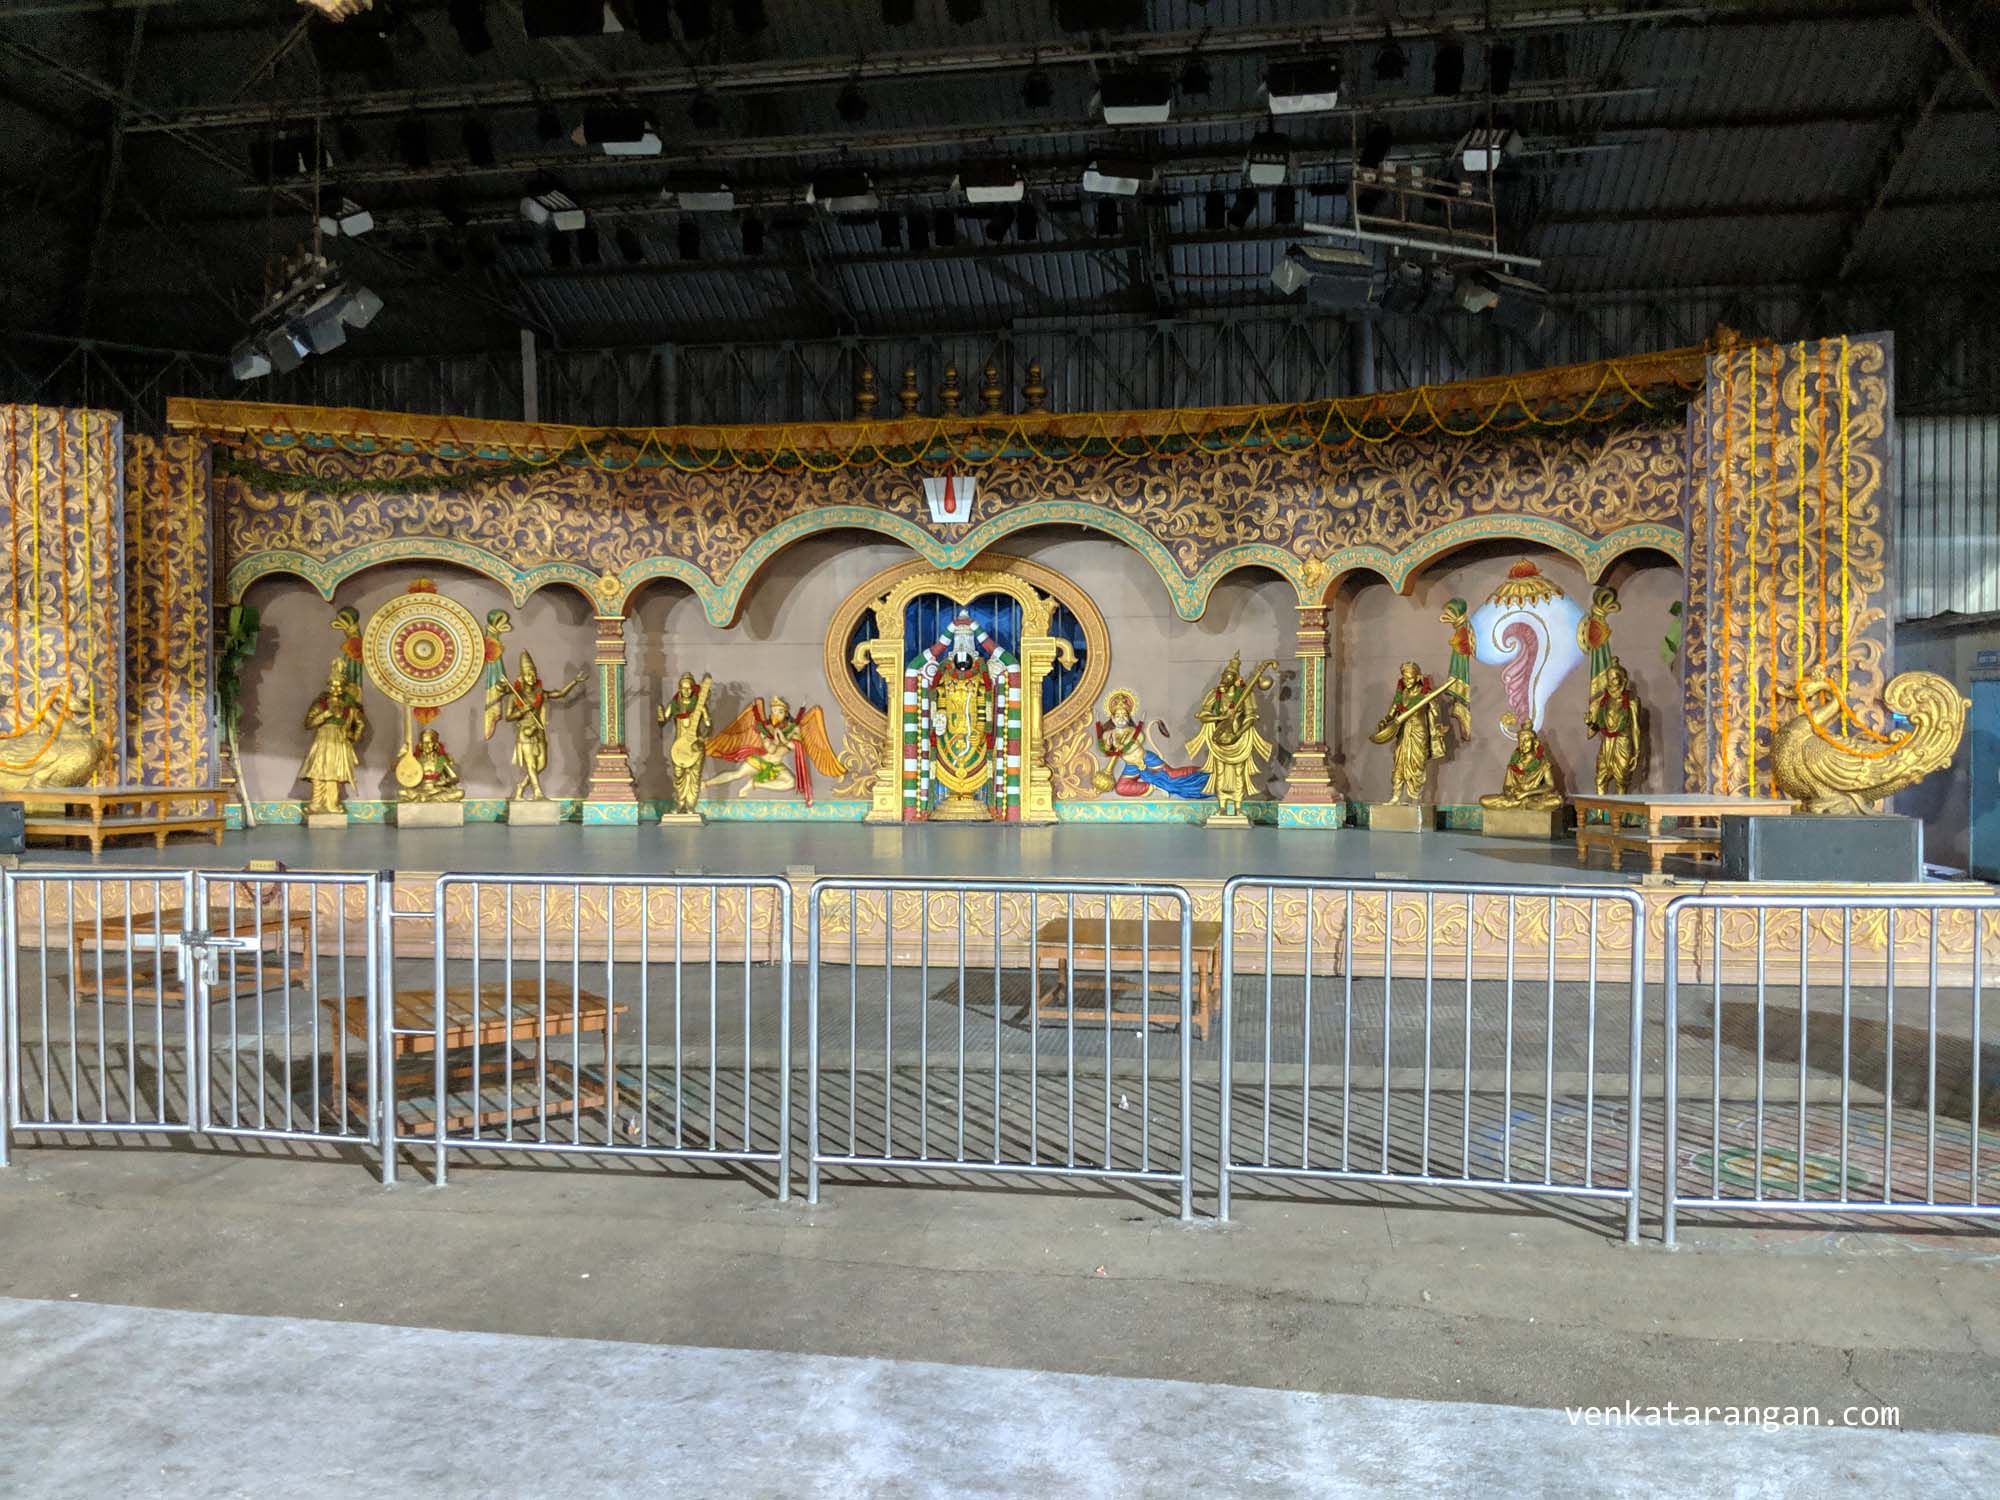 The stage where musical and dance performances happen every day which are broadcast on TTD TV